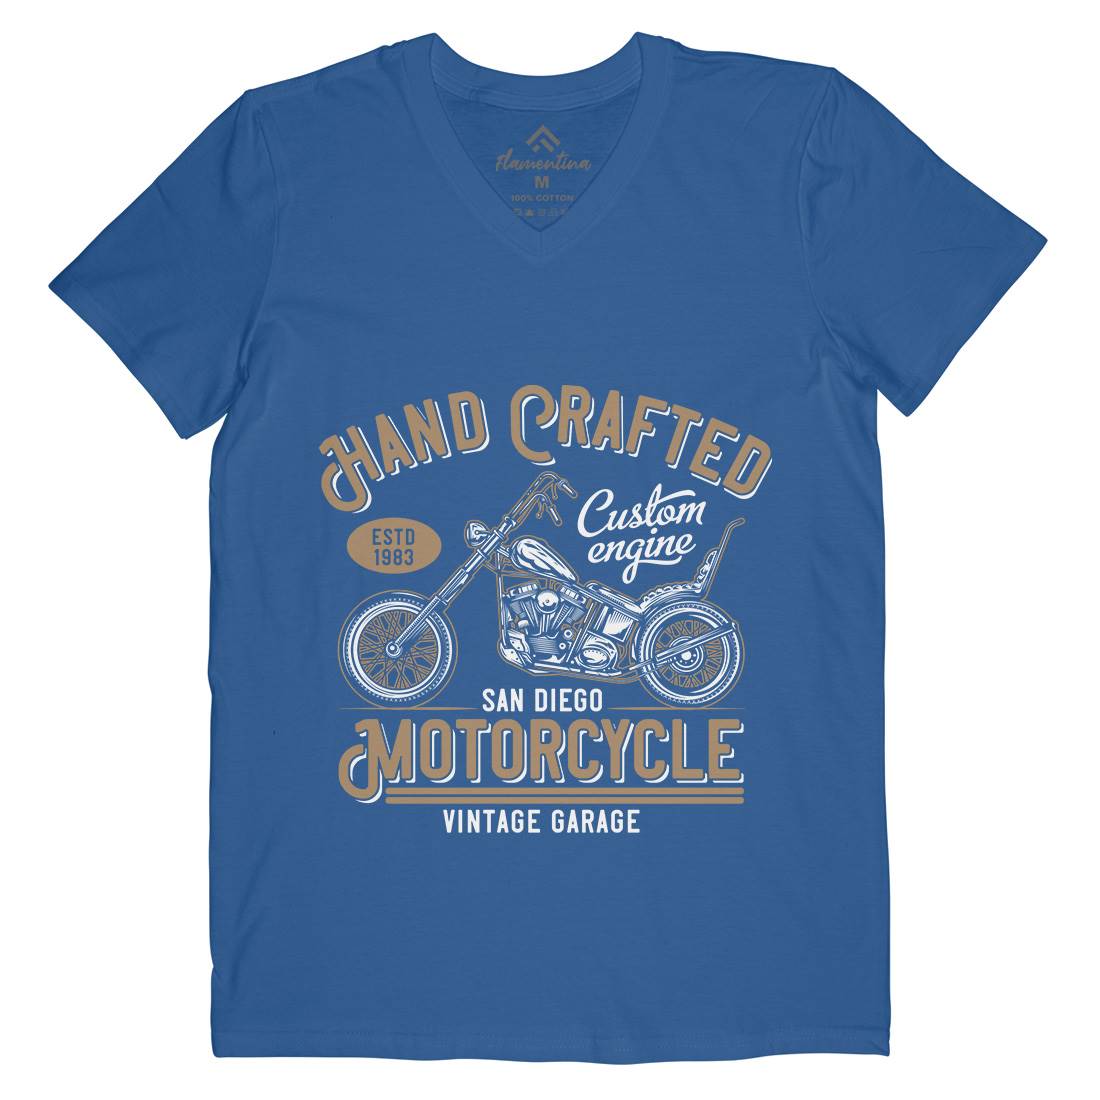 Hand Crafted Mens V-Neck T-Shirt Motorcycles B838